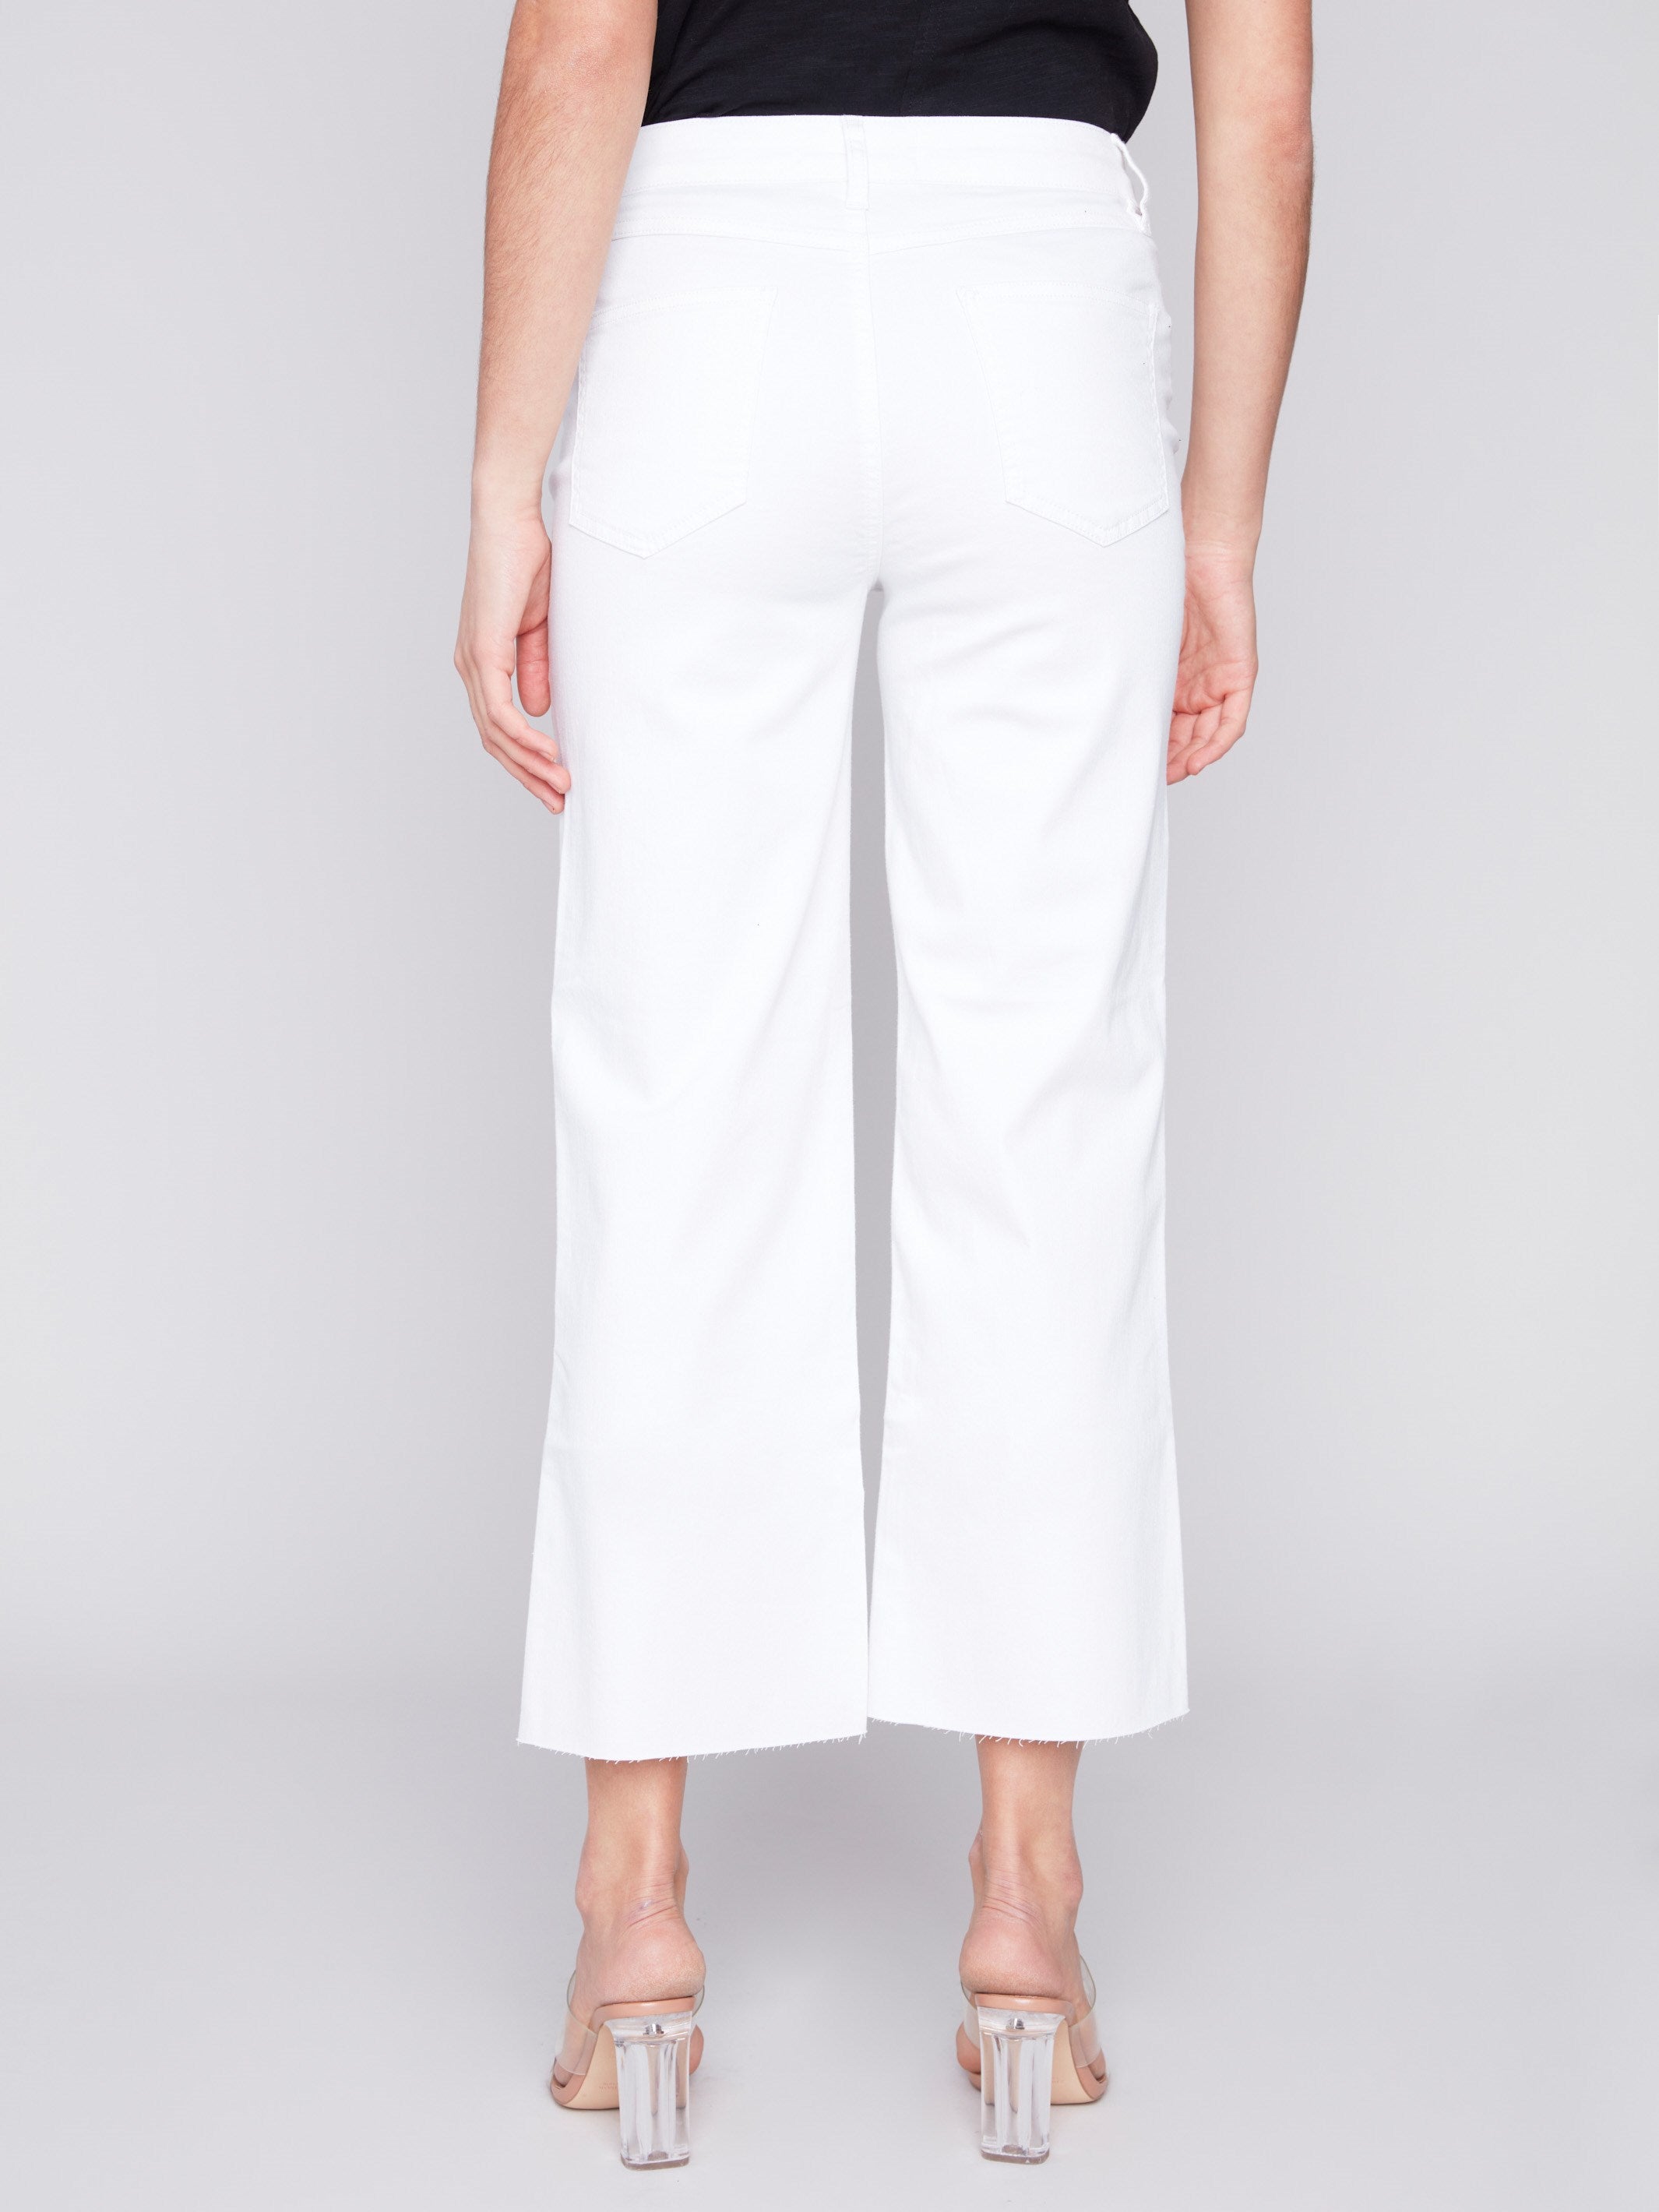 Charlie B Flared Twill Jeans with Raw Edge - White - Image 3